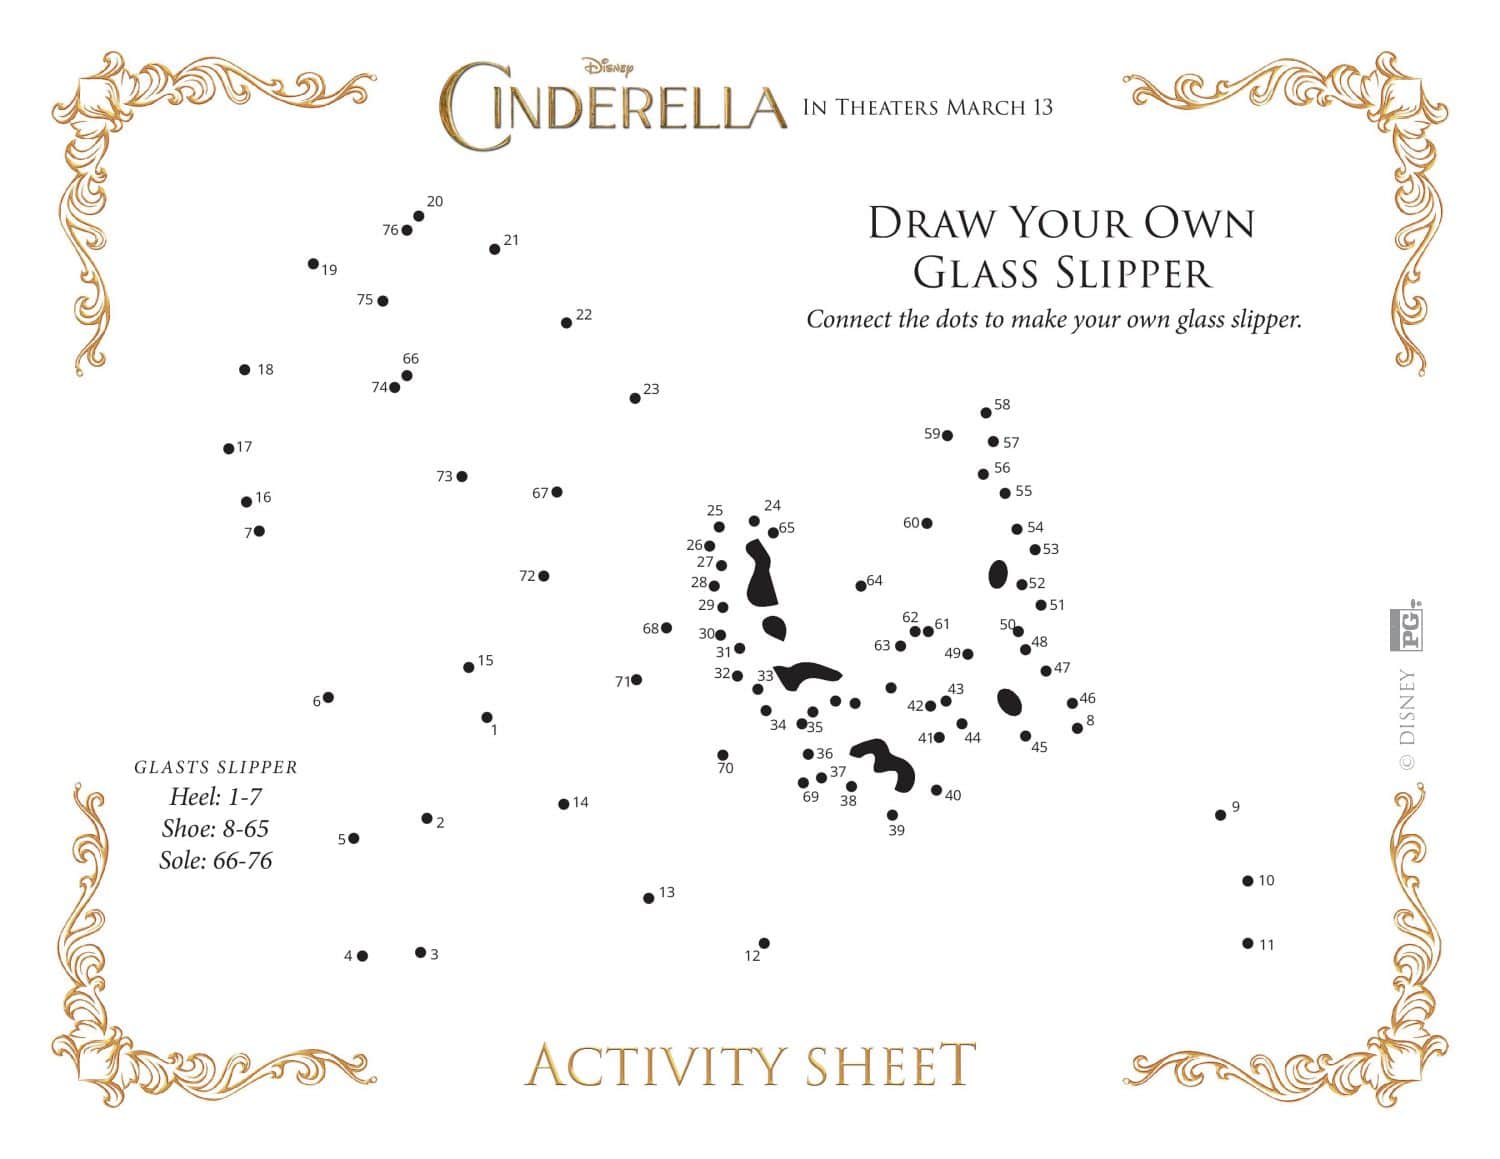 Draw your Own Glass Slipper Cinderella connect the dots